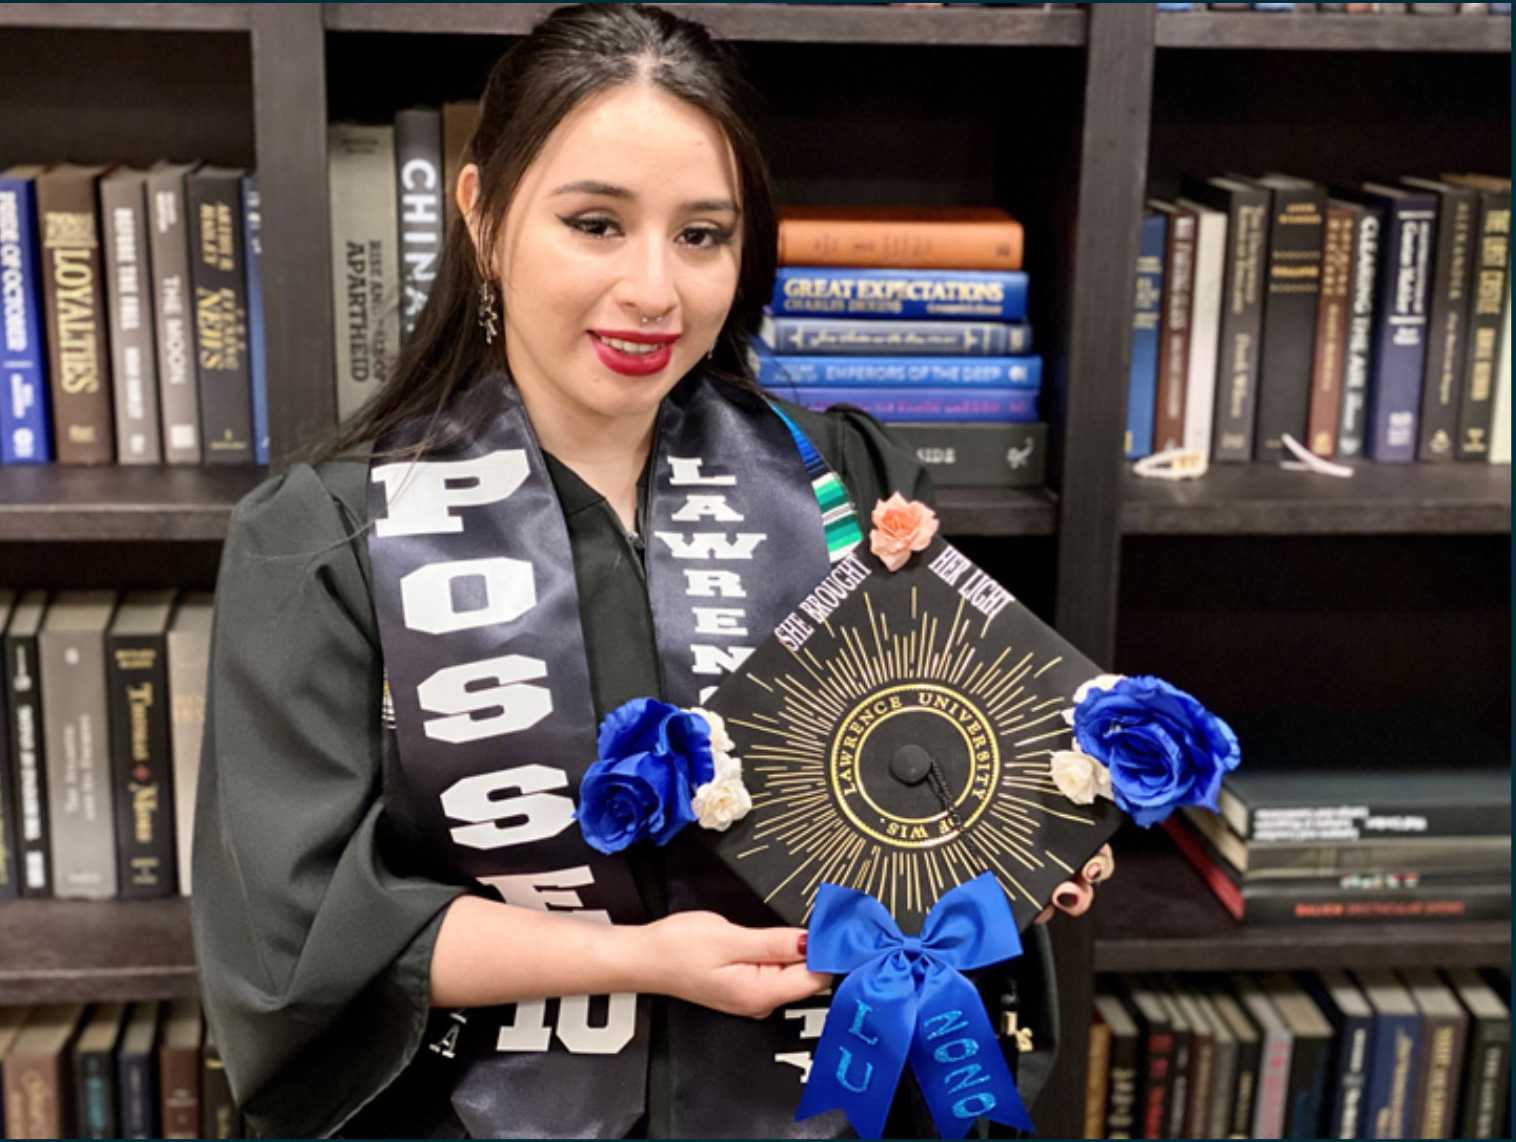 Samantha Lizbeth Torres poses for a photo with her cap and gown in 2020.